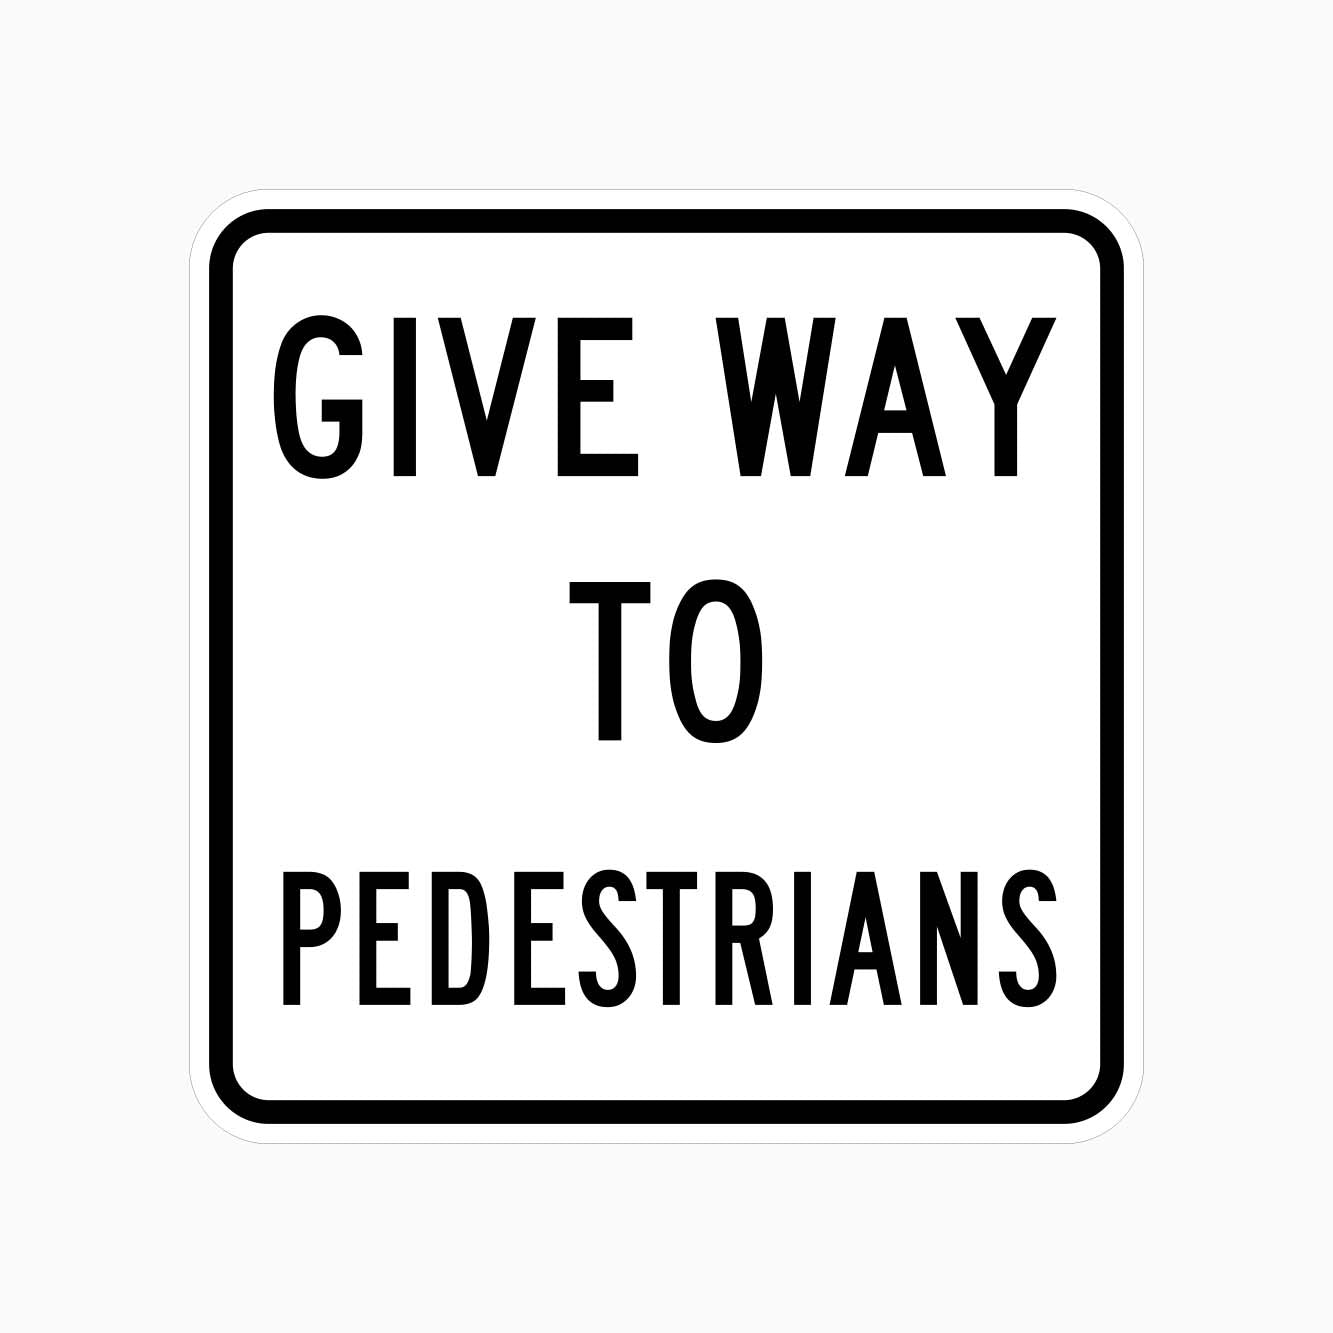 GIVE WAY TO PEDESTRIANS SIGN - R2-10 - GET SIGNS